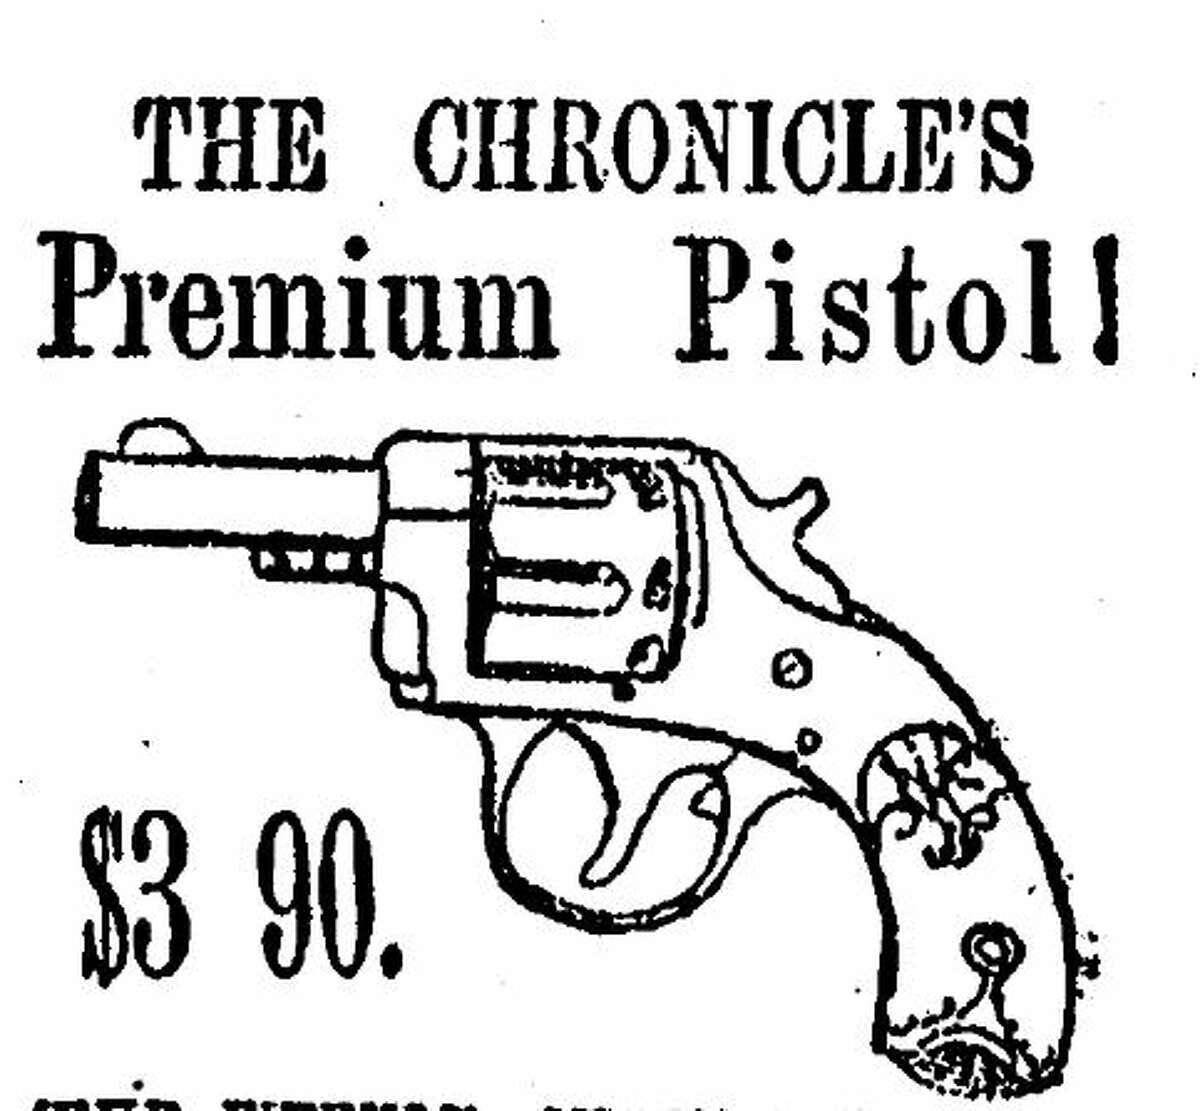 In a San Francisco Chronicle ad from October 12, 1888, stated that if you purchased a one year subscription for $3.90, it would include a Chronicle pistol. From the San Francisco Chronicle archives.